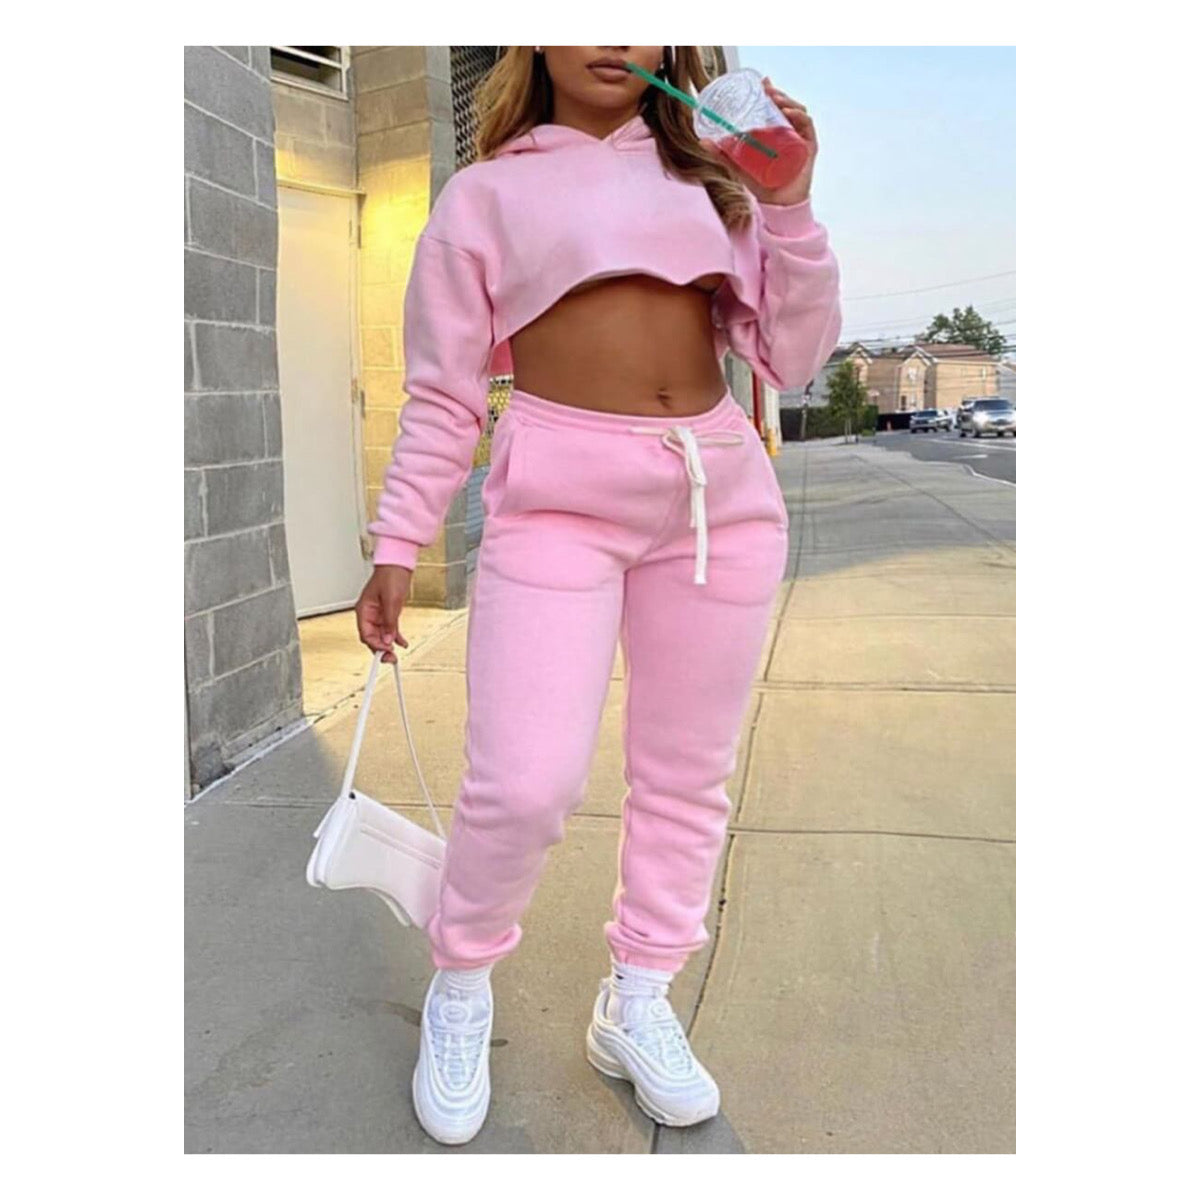 Pink “Cropped” Sweatsuit